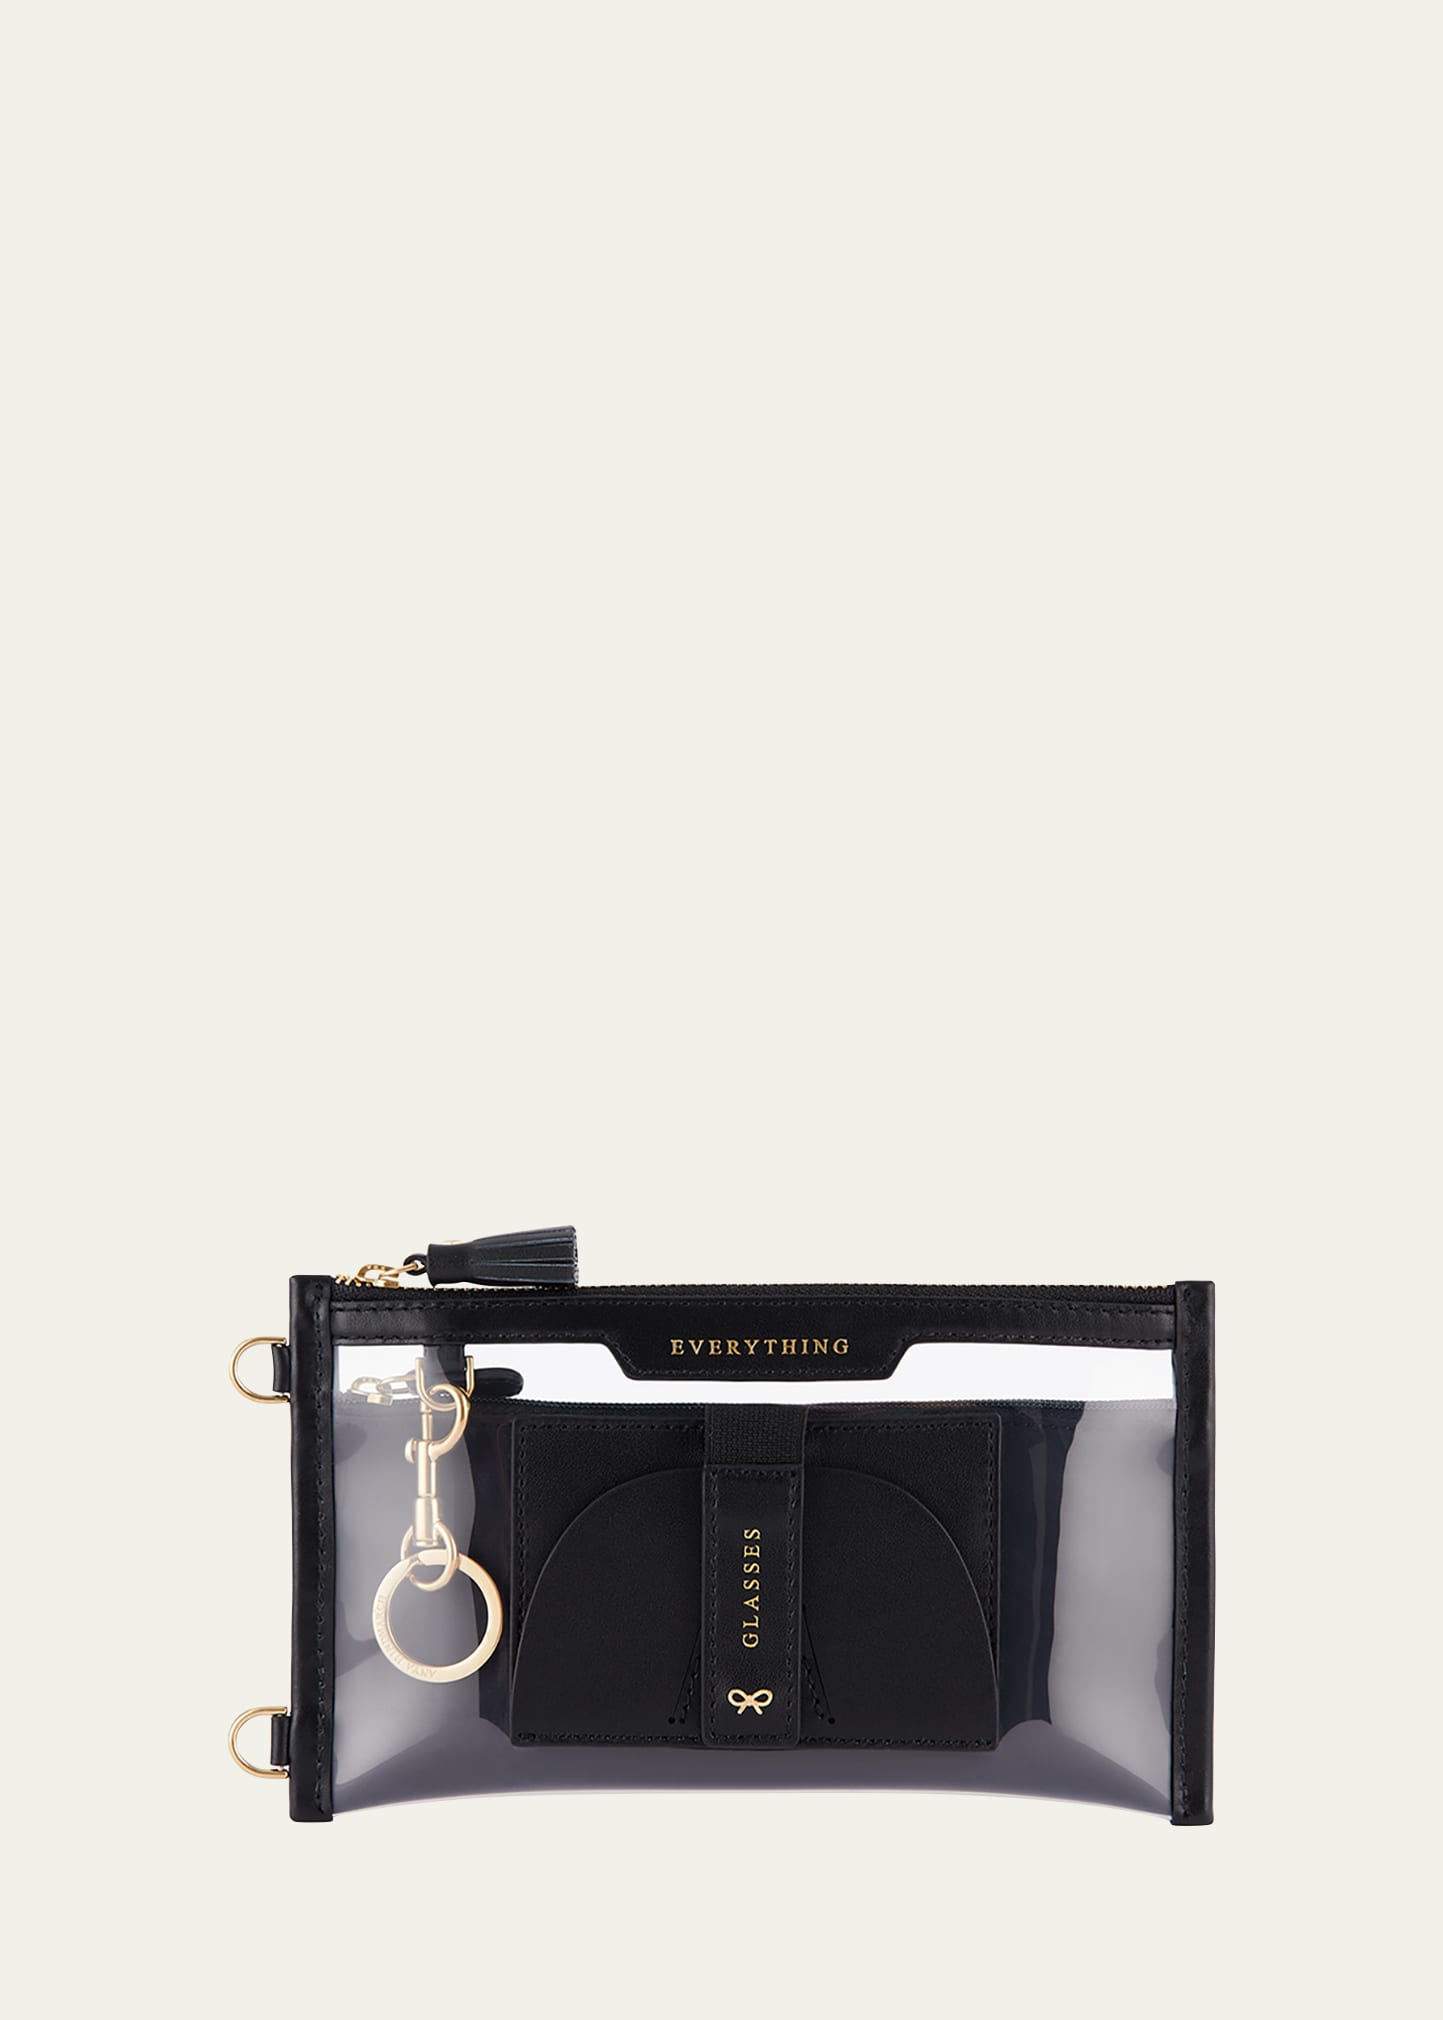 Anya Hindmarch Everything Pouch Clear Crossbody Bag - Bergdorf